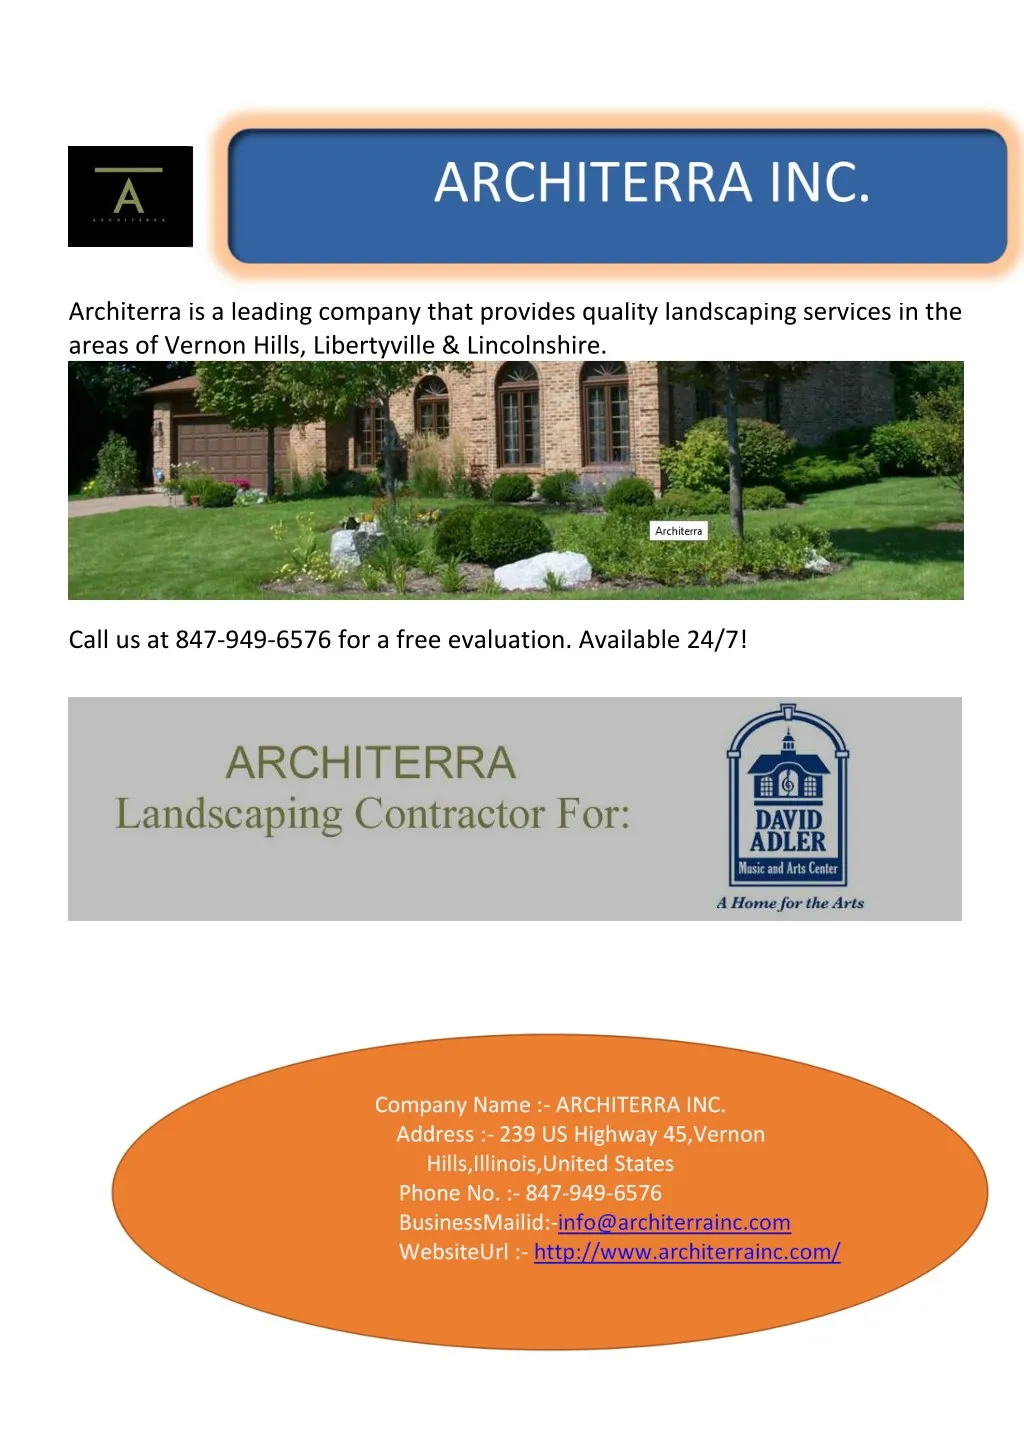 architerra is a leading company that provides